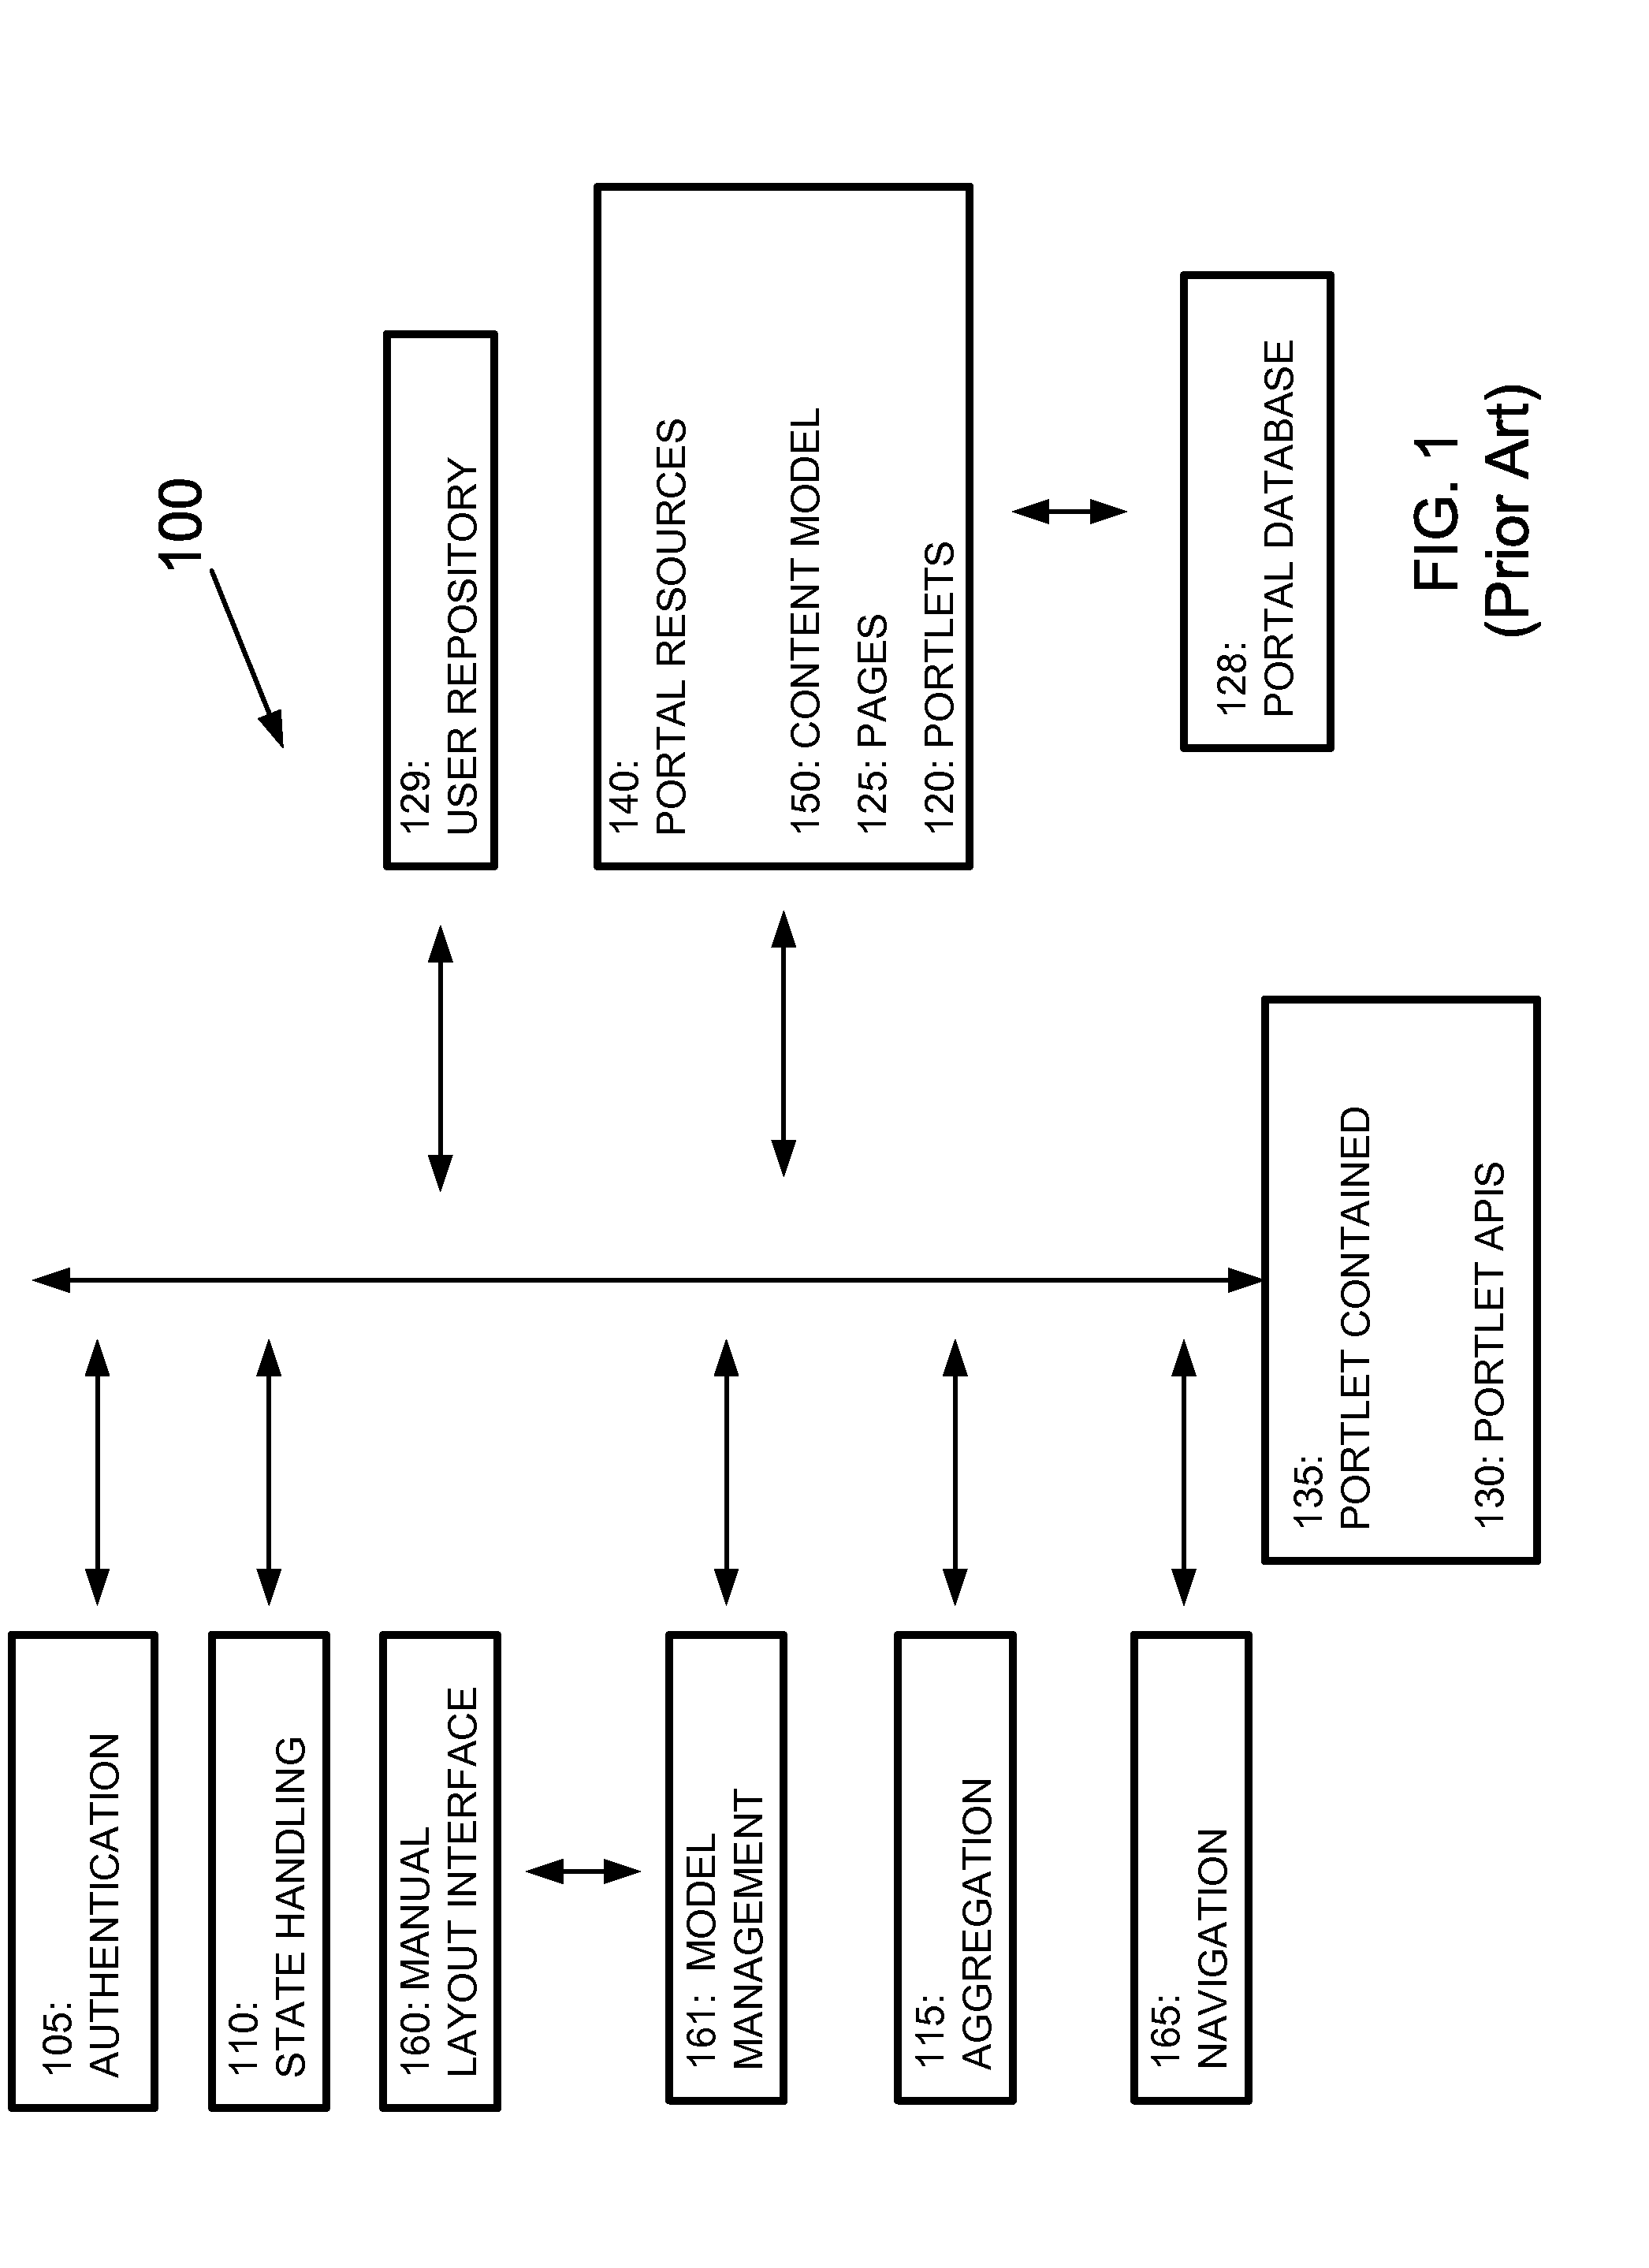 Method for Graphical Visualization of Multiple Traversed Breadcrumb Trails